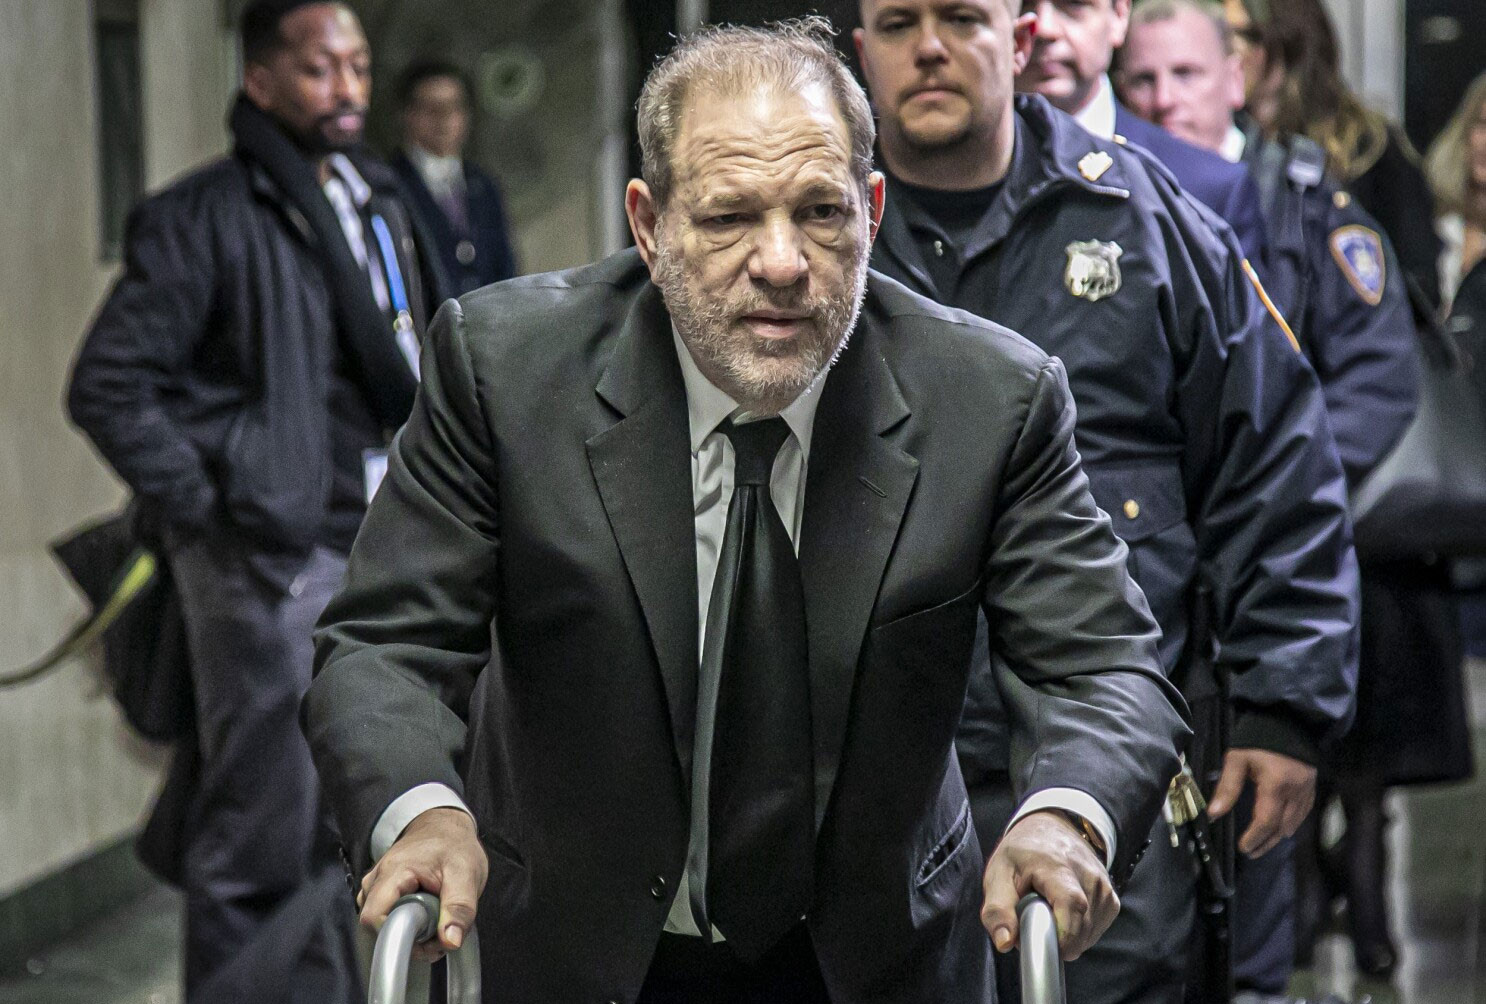 harvey weinstein to face retrial in new york after rape conviction overturned